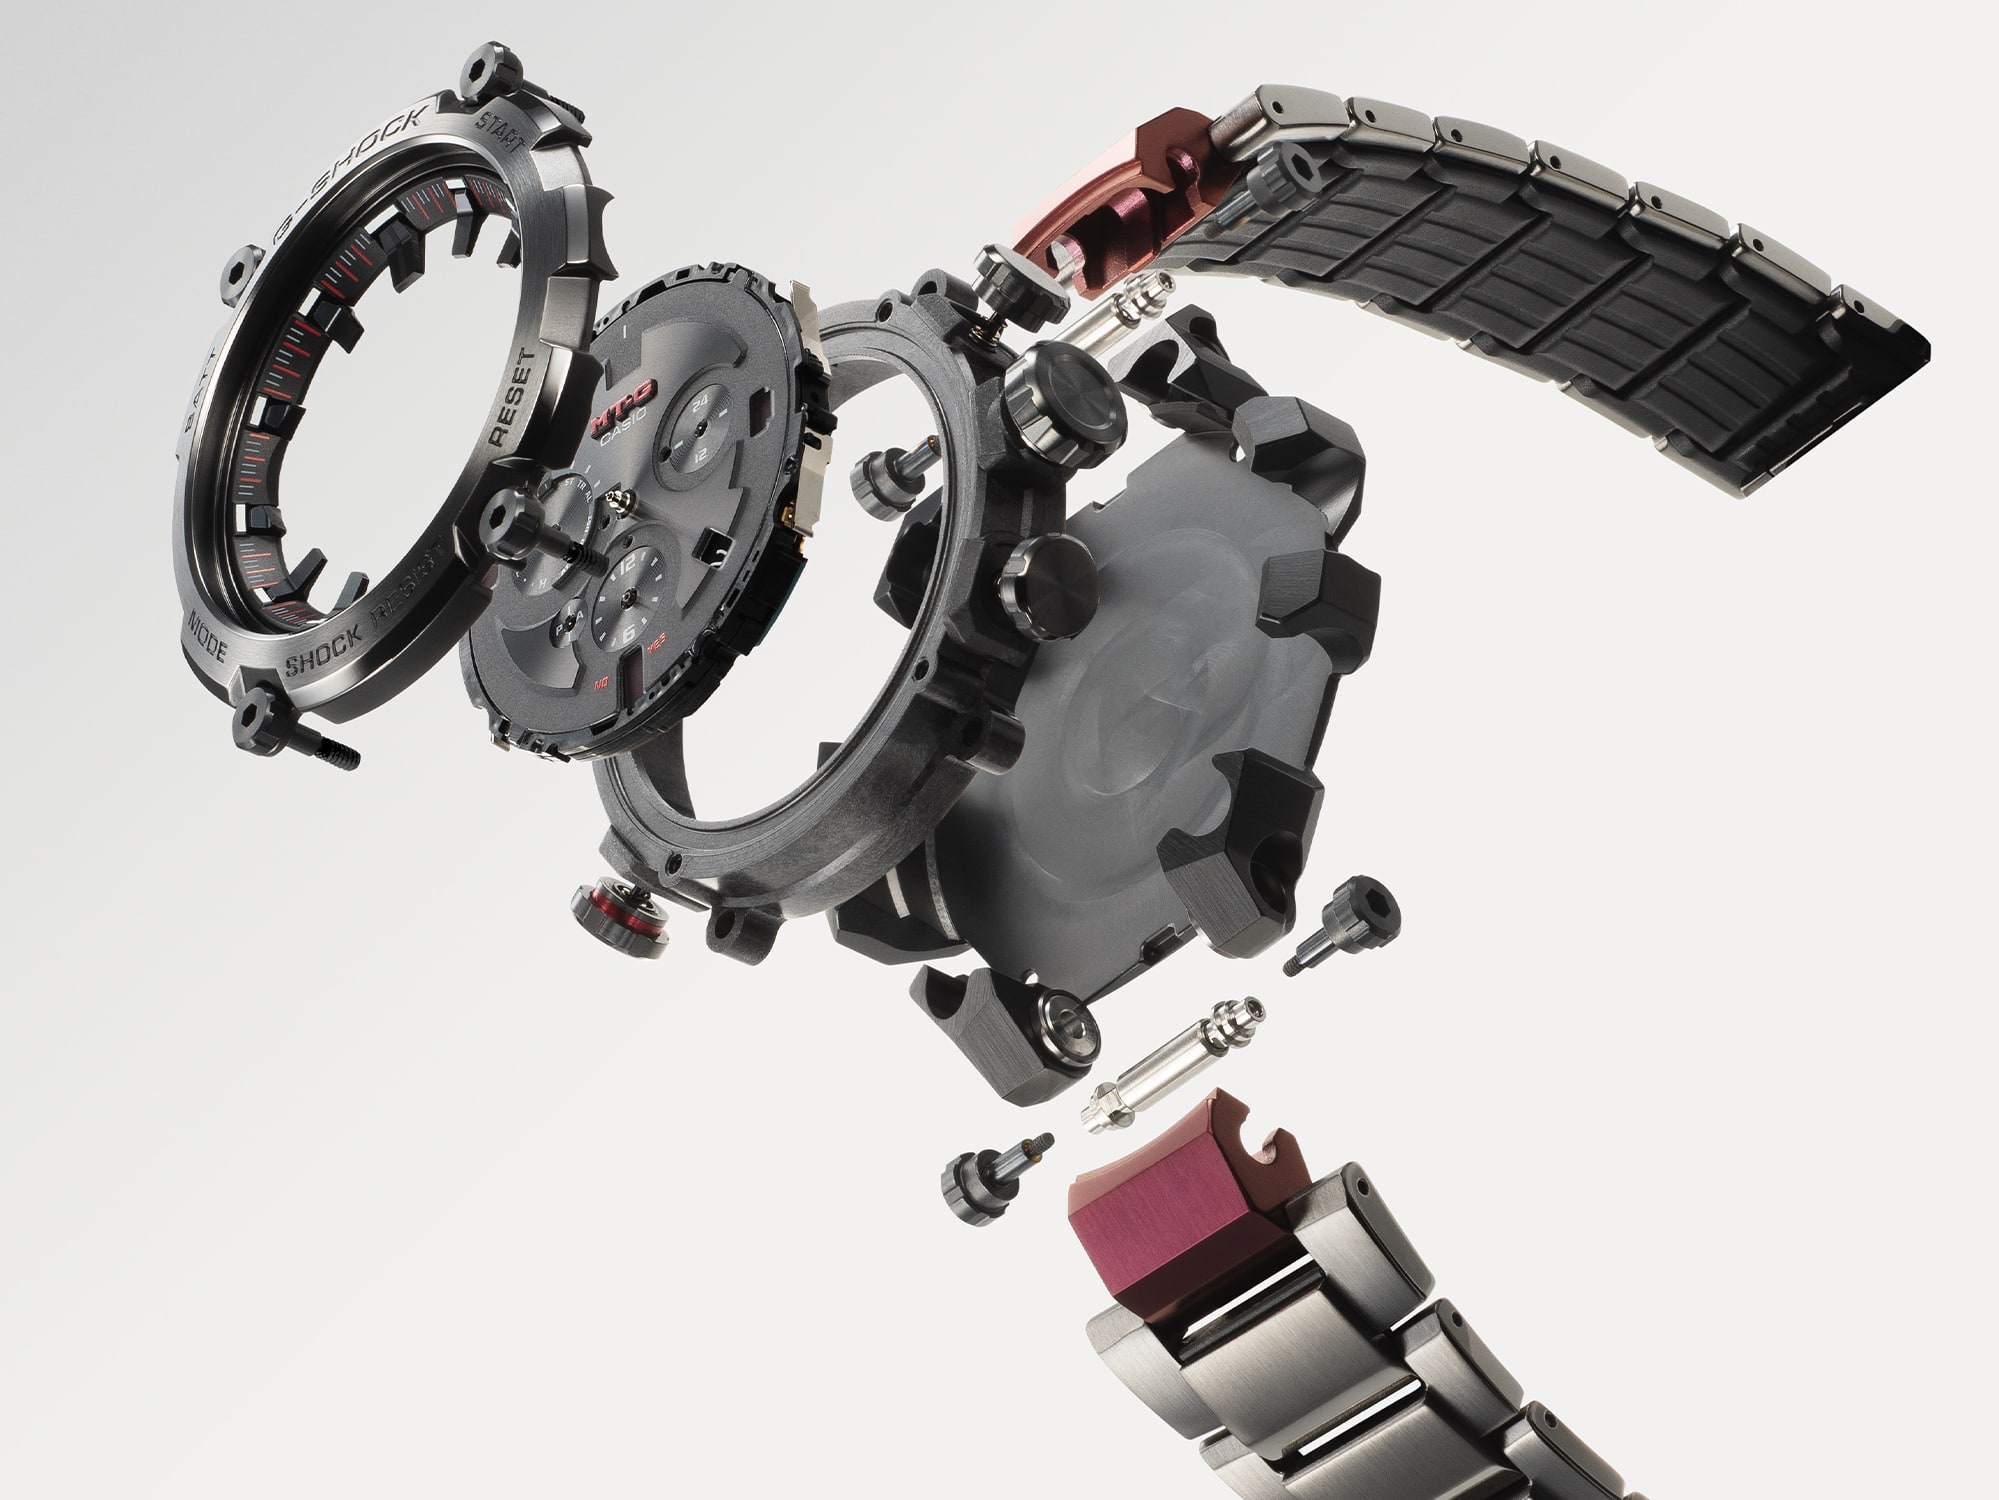 Exploded view of G-SHOCK MTG watch